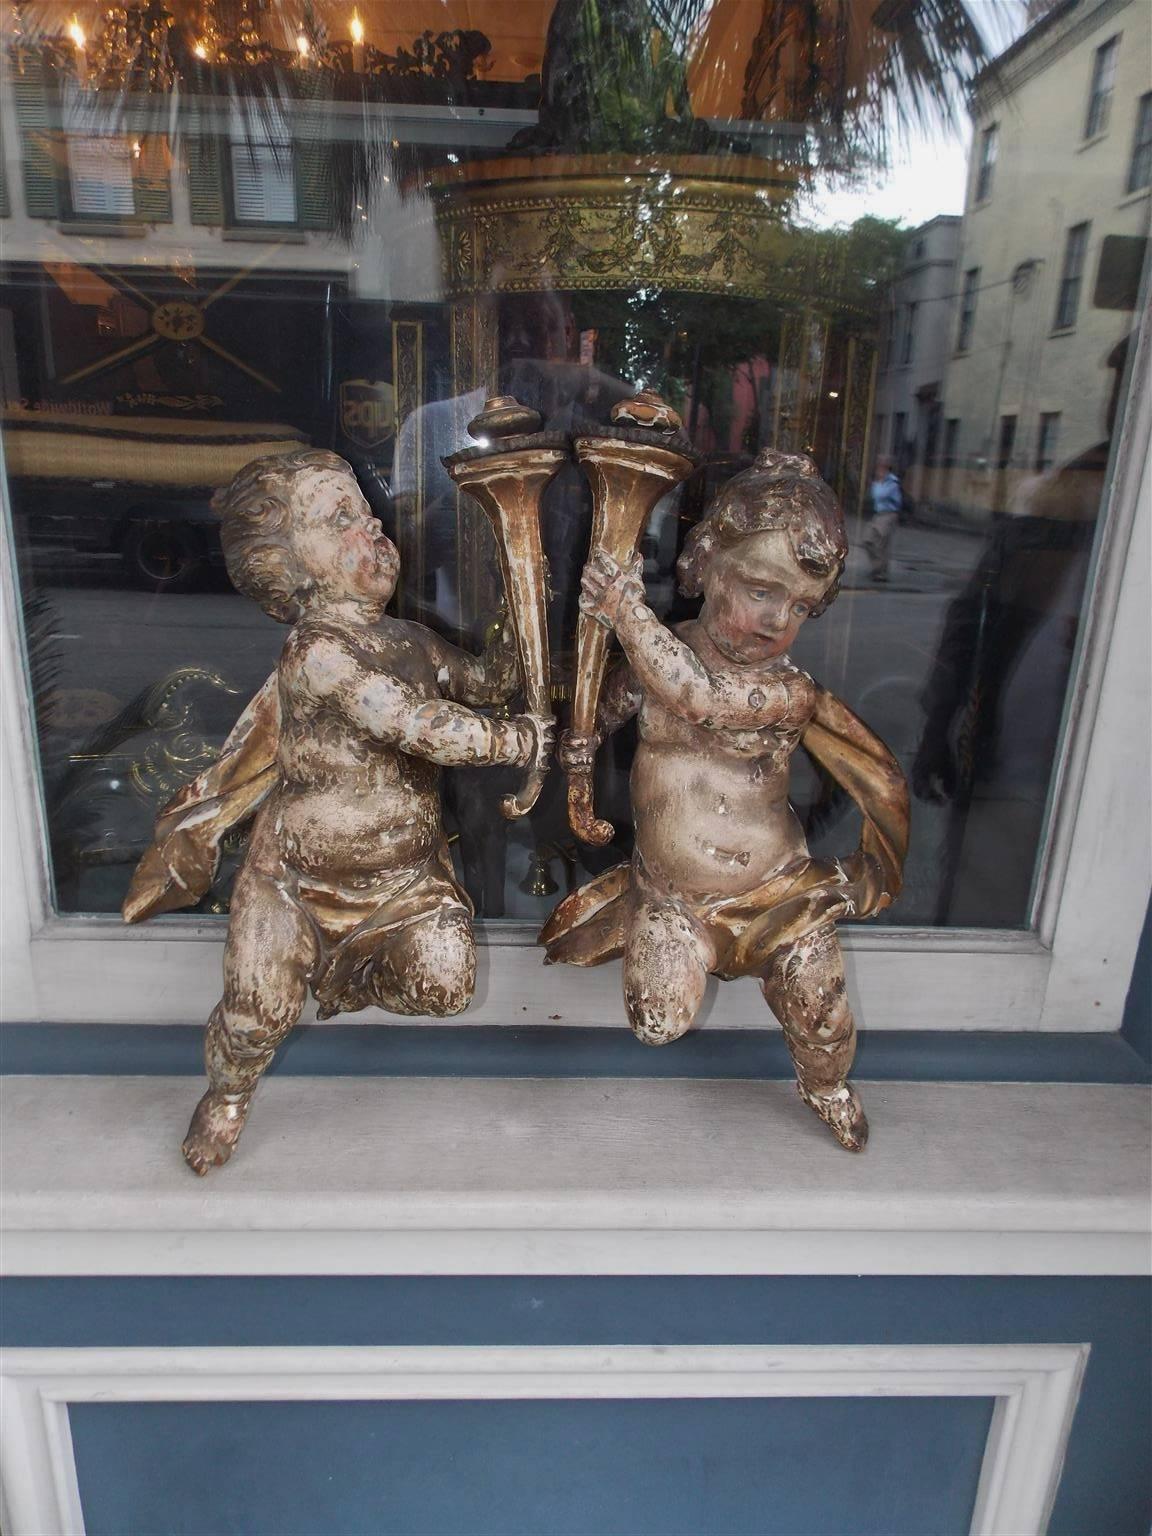 Pair of Italian hanging carved wood, gesso, and poly chromed figural putti each holding a torch, wrapped with a sash, and fitted with exterior rear mounts. Late 18th century.